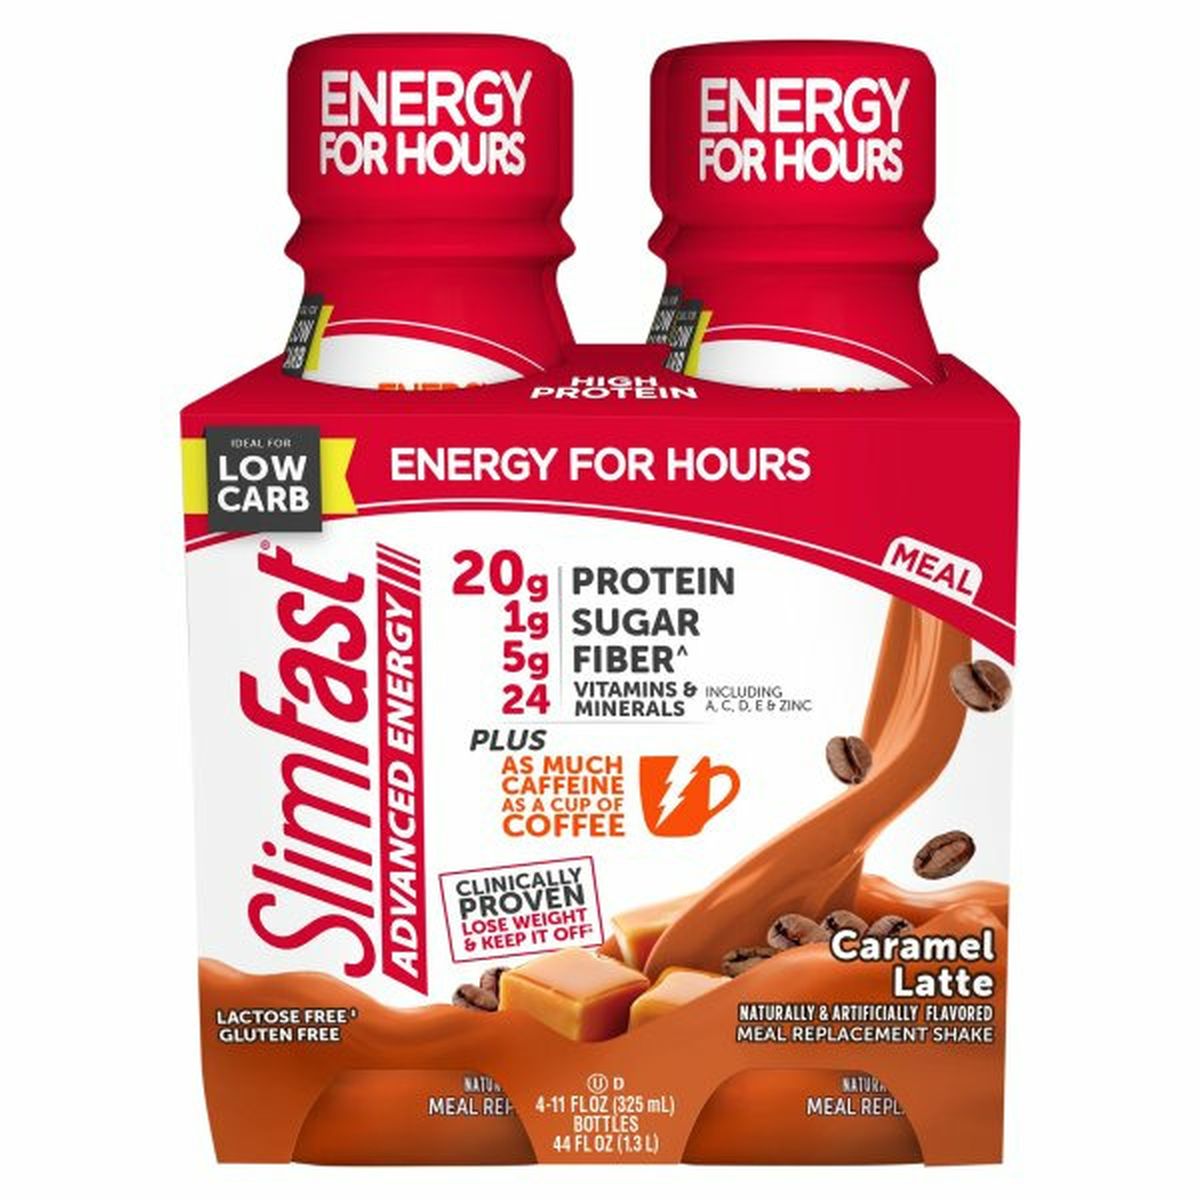 Calories in SlimFast Advanced Energy Meal Replacement Shake, Caramel Latte